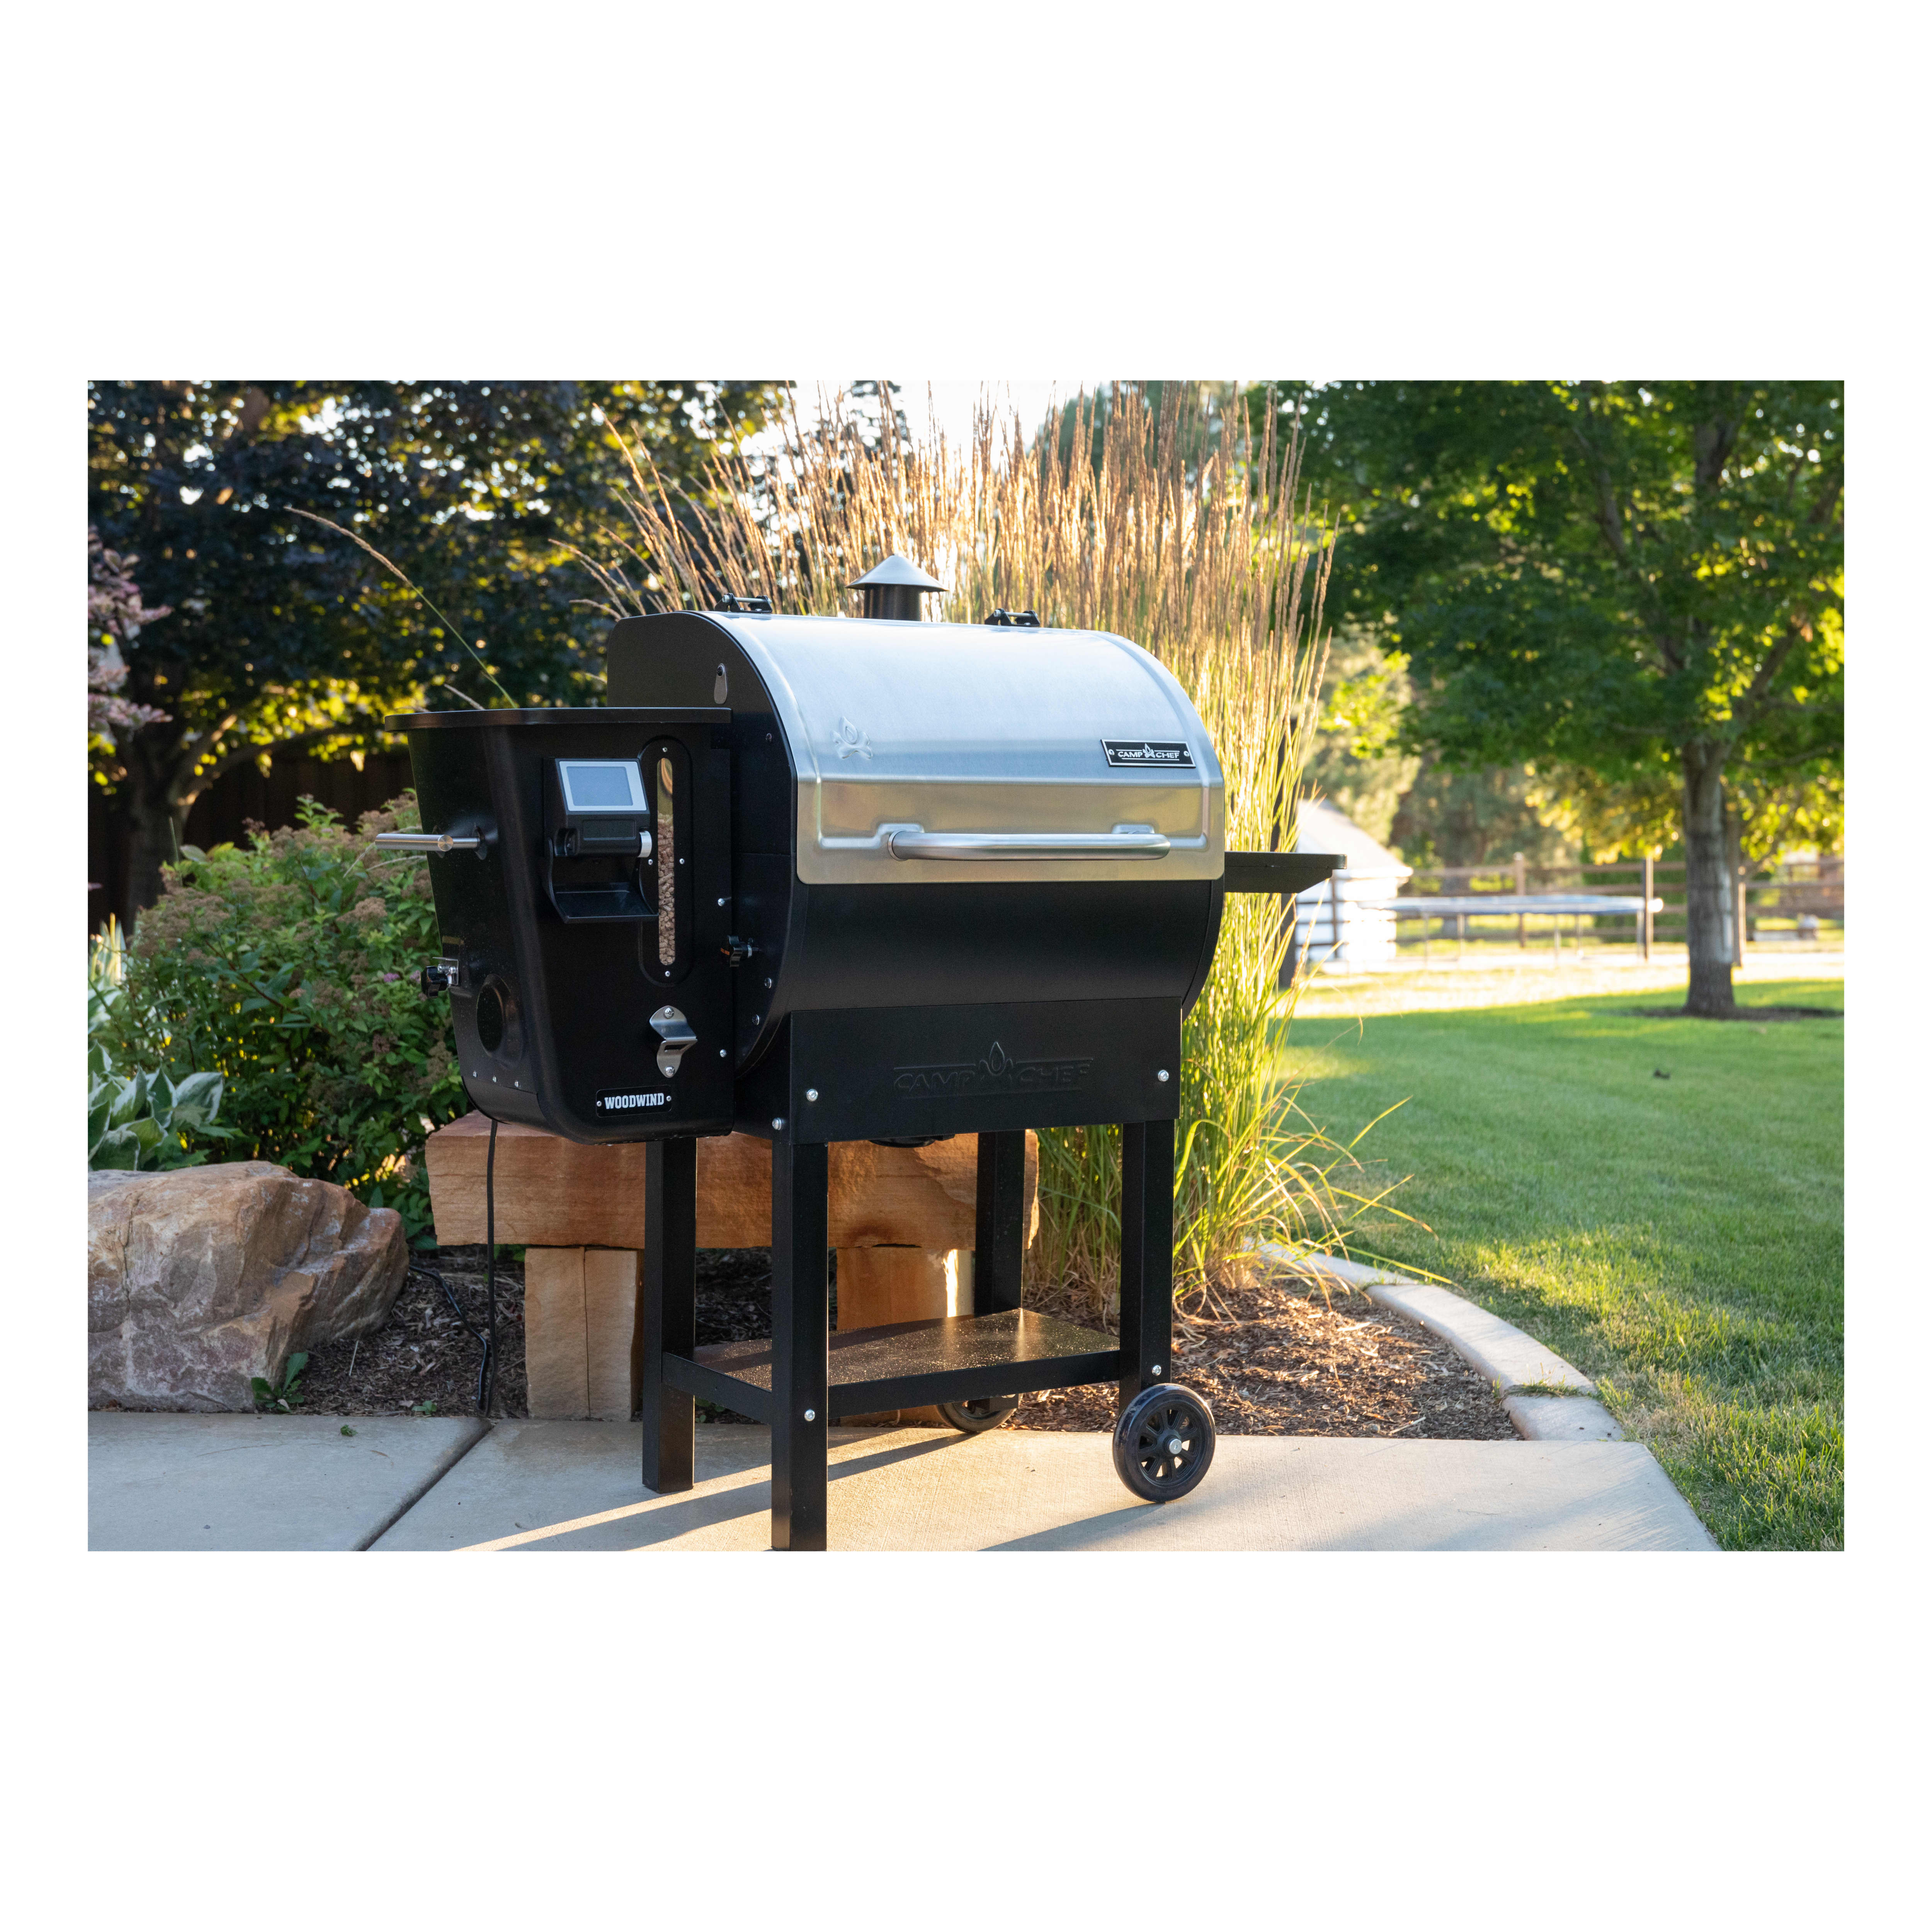 Camp Chef® Woodwind 24" Pellet Grill 